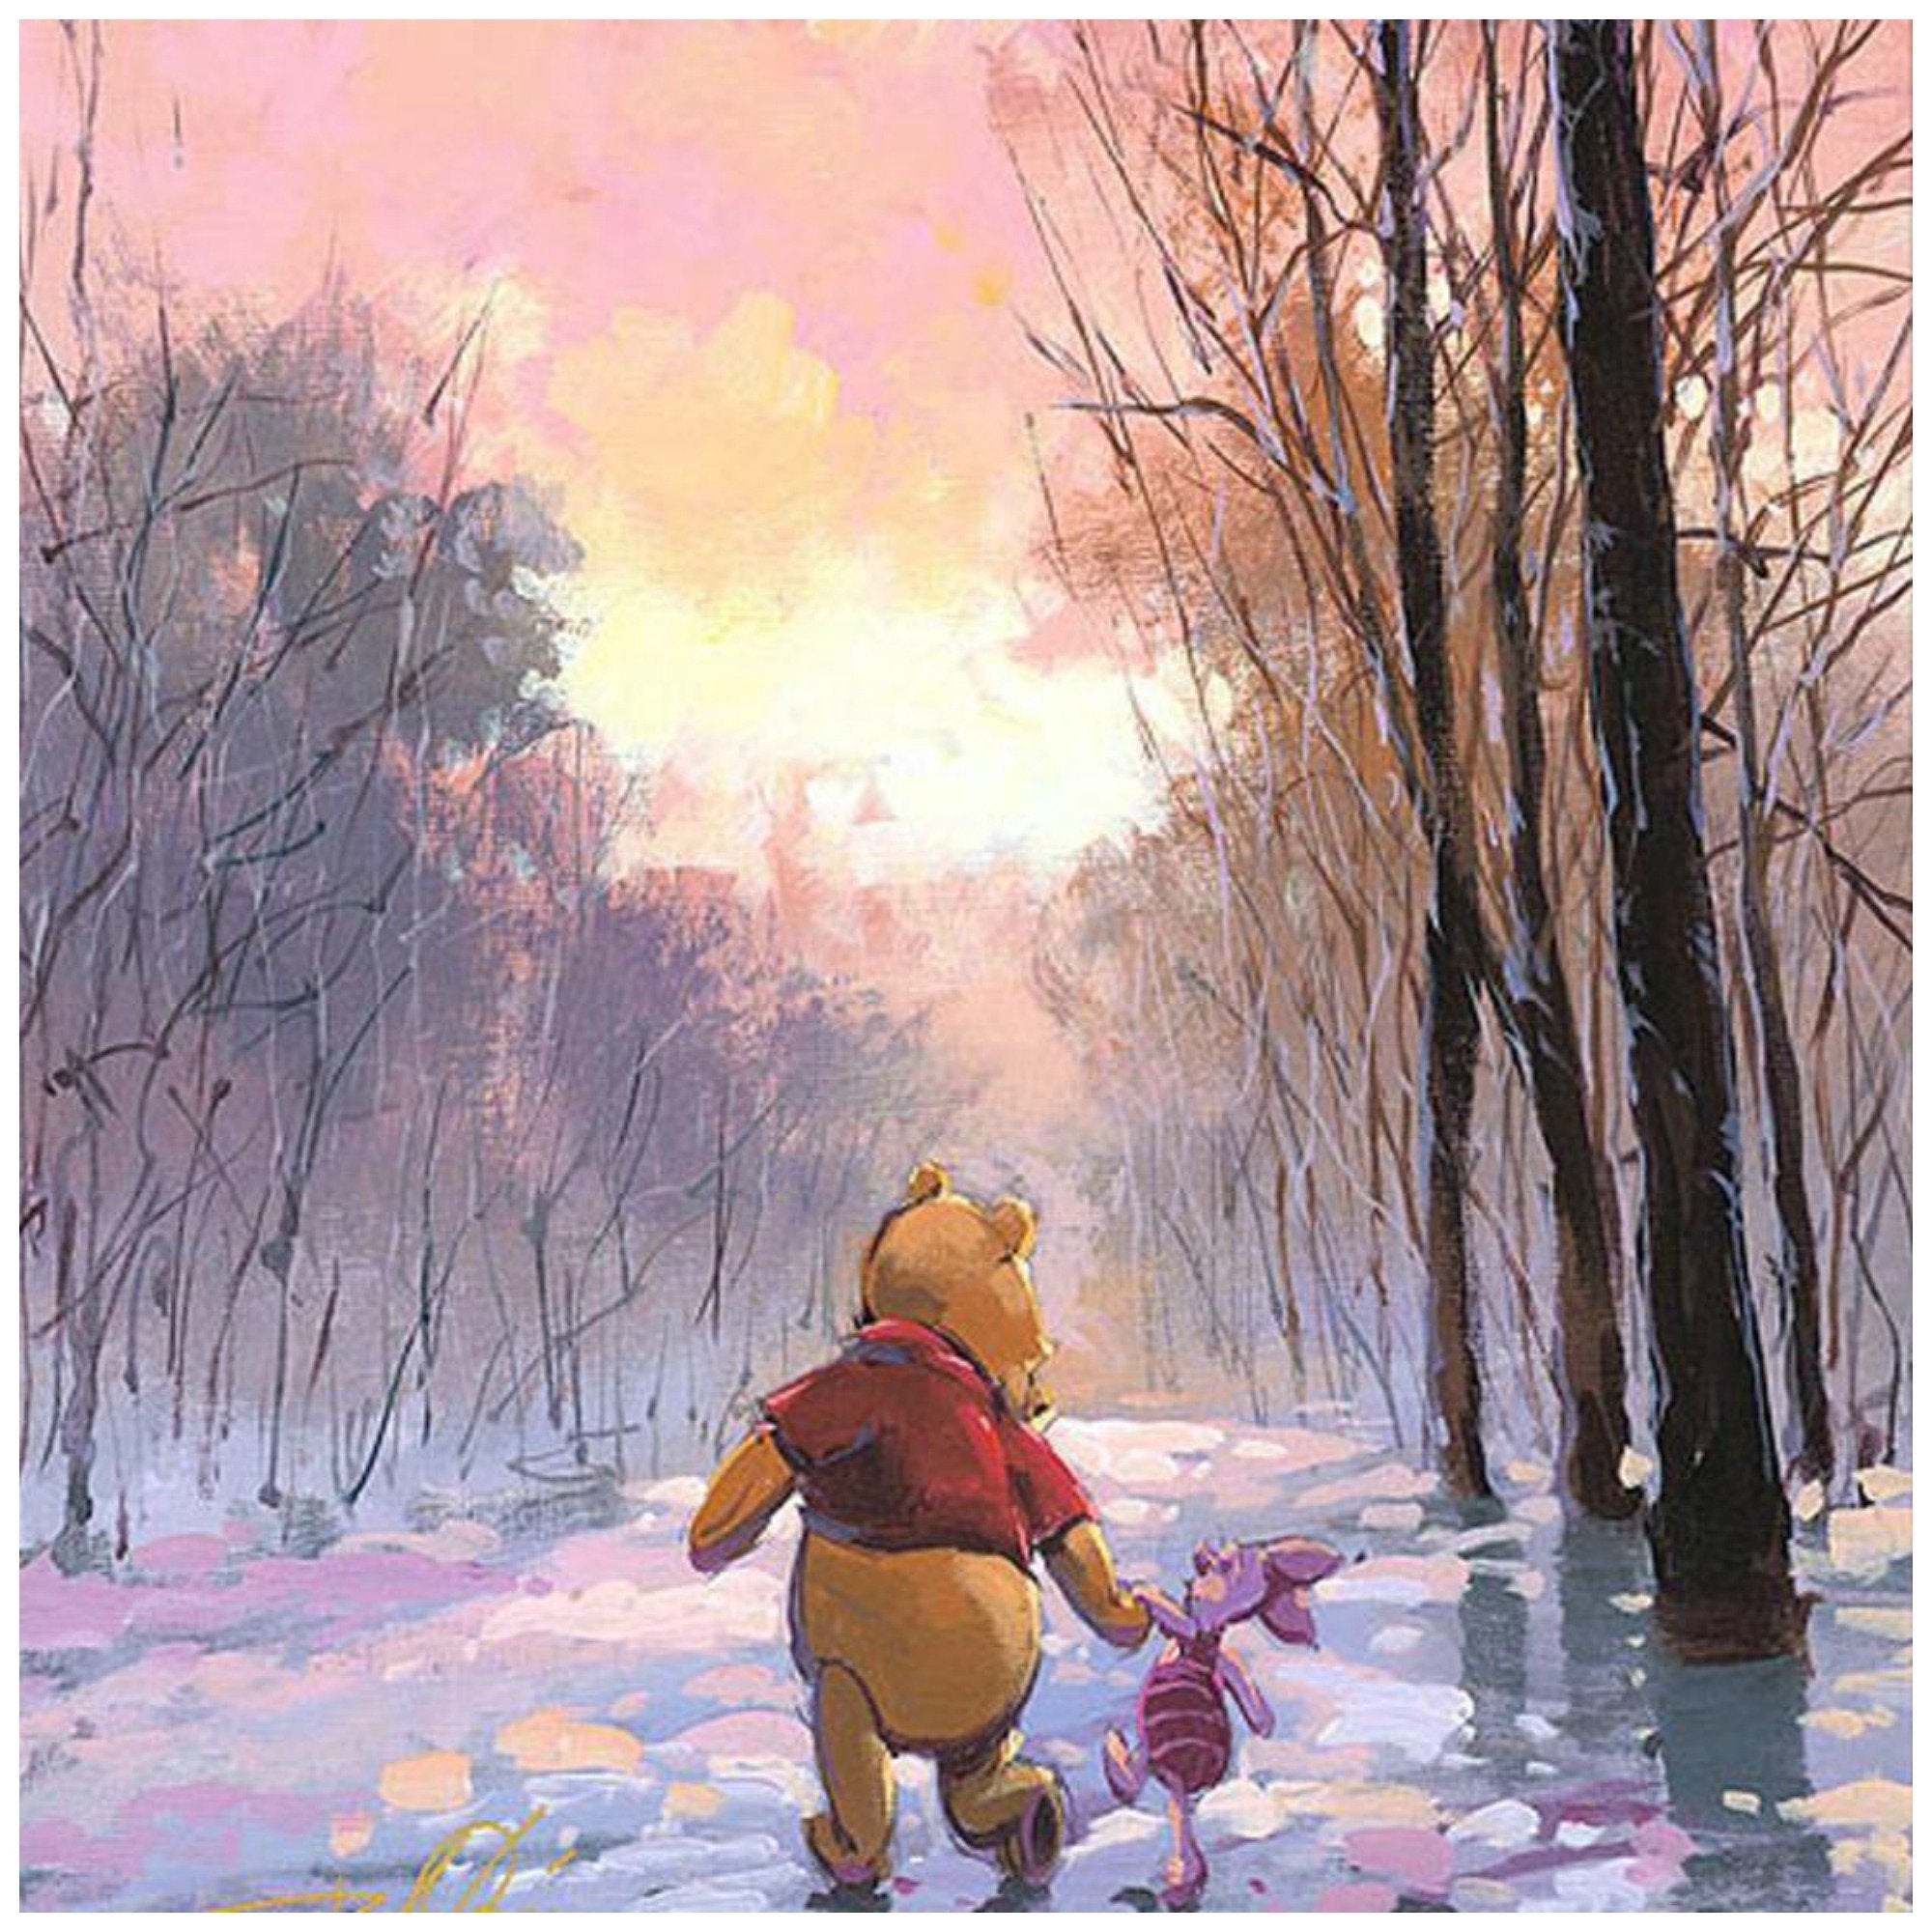 Snowy Path by Rodel Gonzalez  Winnie the Pooh and his friend Piglet take a winter day stroll through a snowy path - closeup